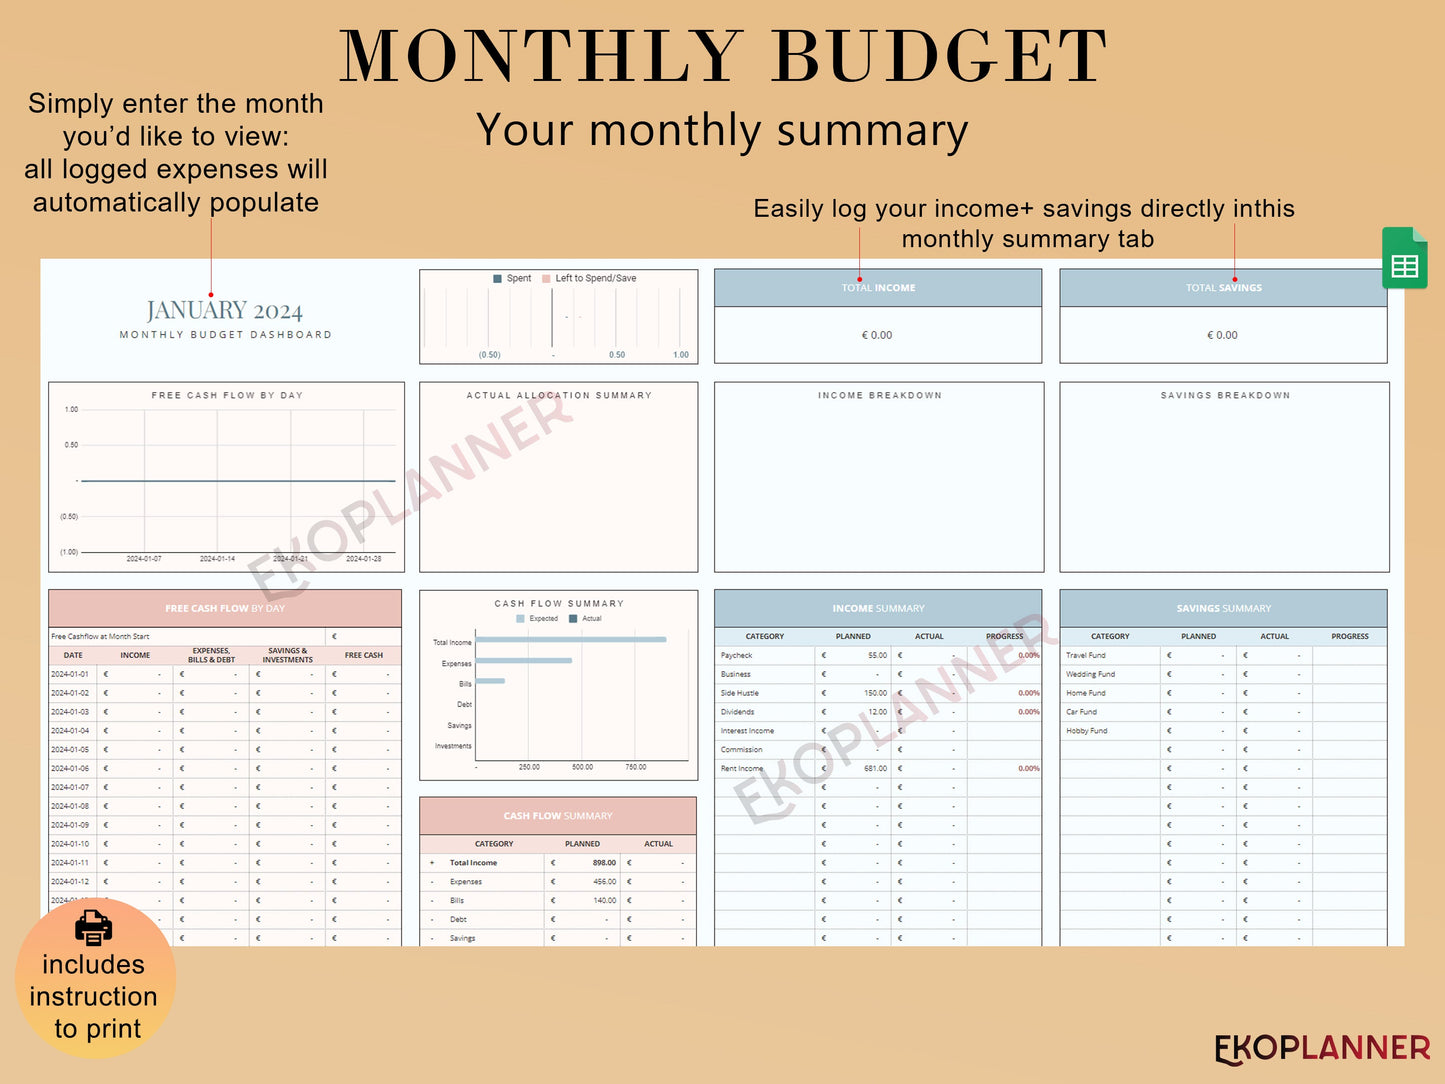 Yearly Budget Spreadsheet Template for Google Sheets - Layout Version 3.0